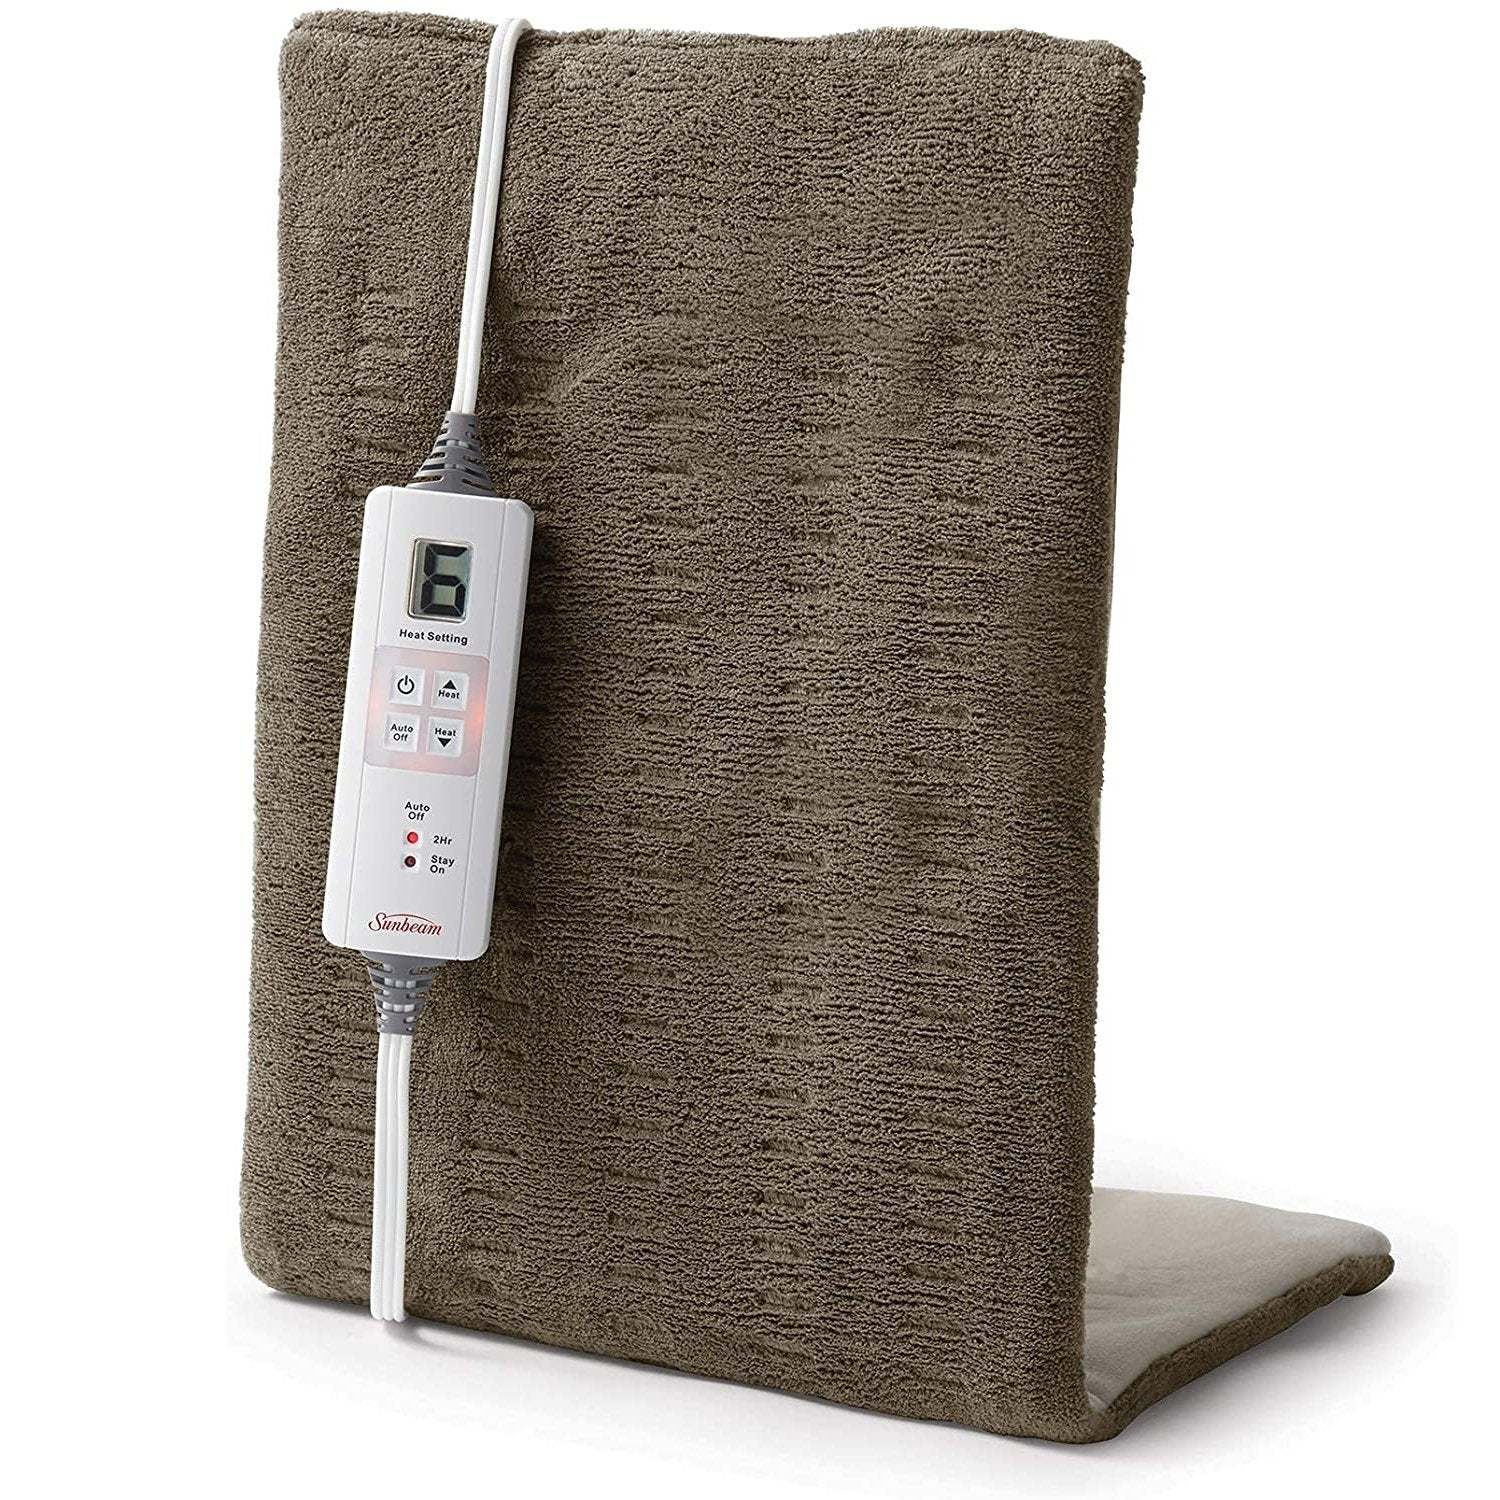 Primary image for Sunbeam - XL Xpress Heat 12 '' x 24 '' Heating Pad with Auto Shut Off, Brown